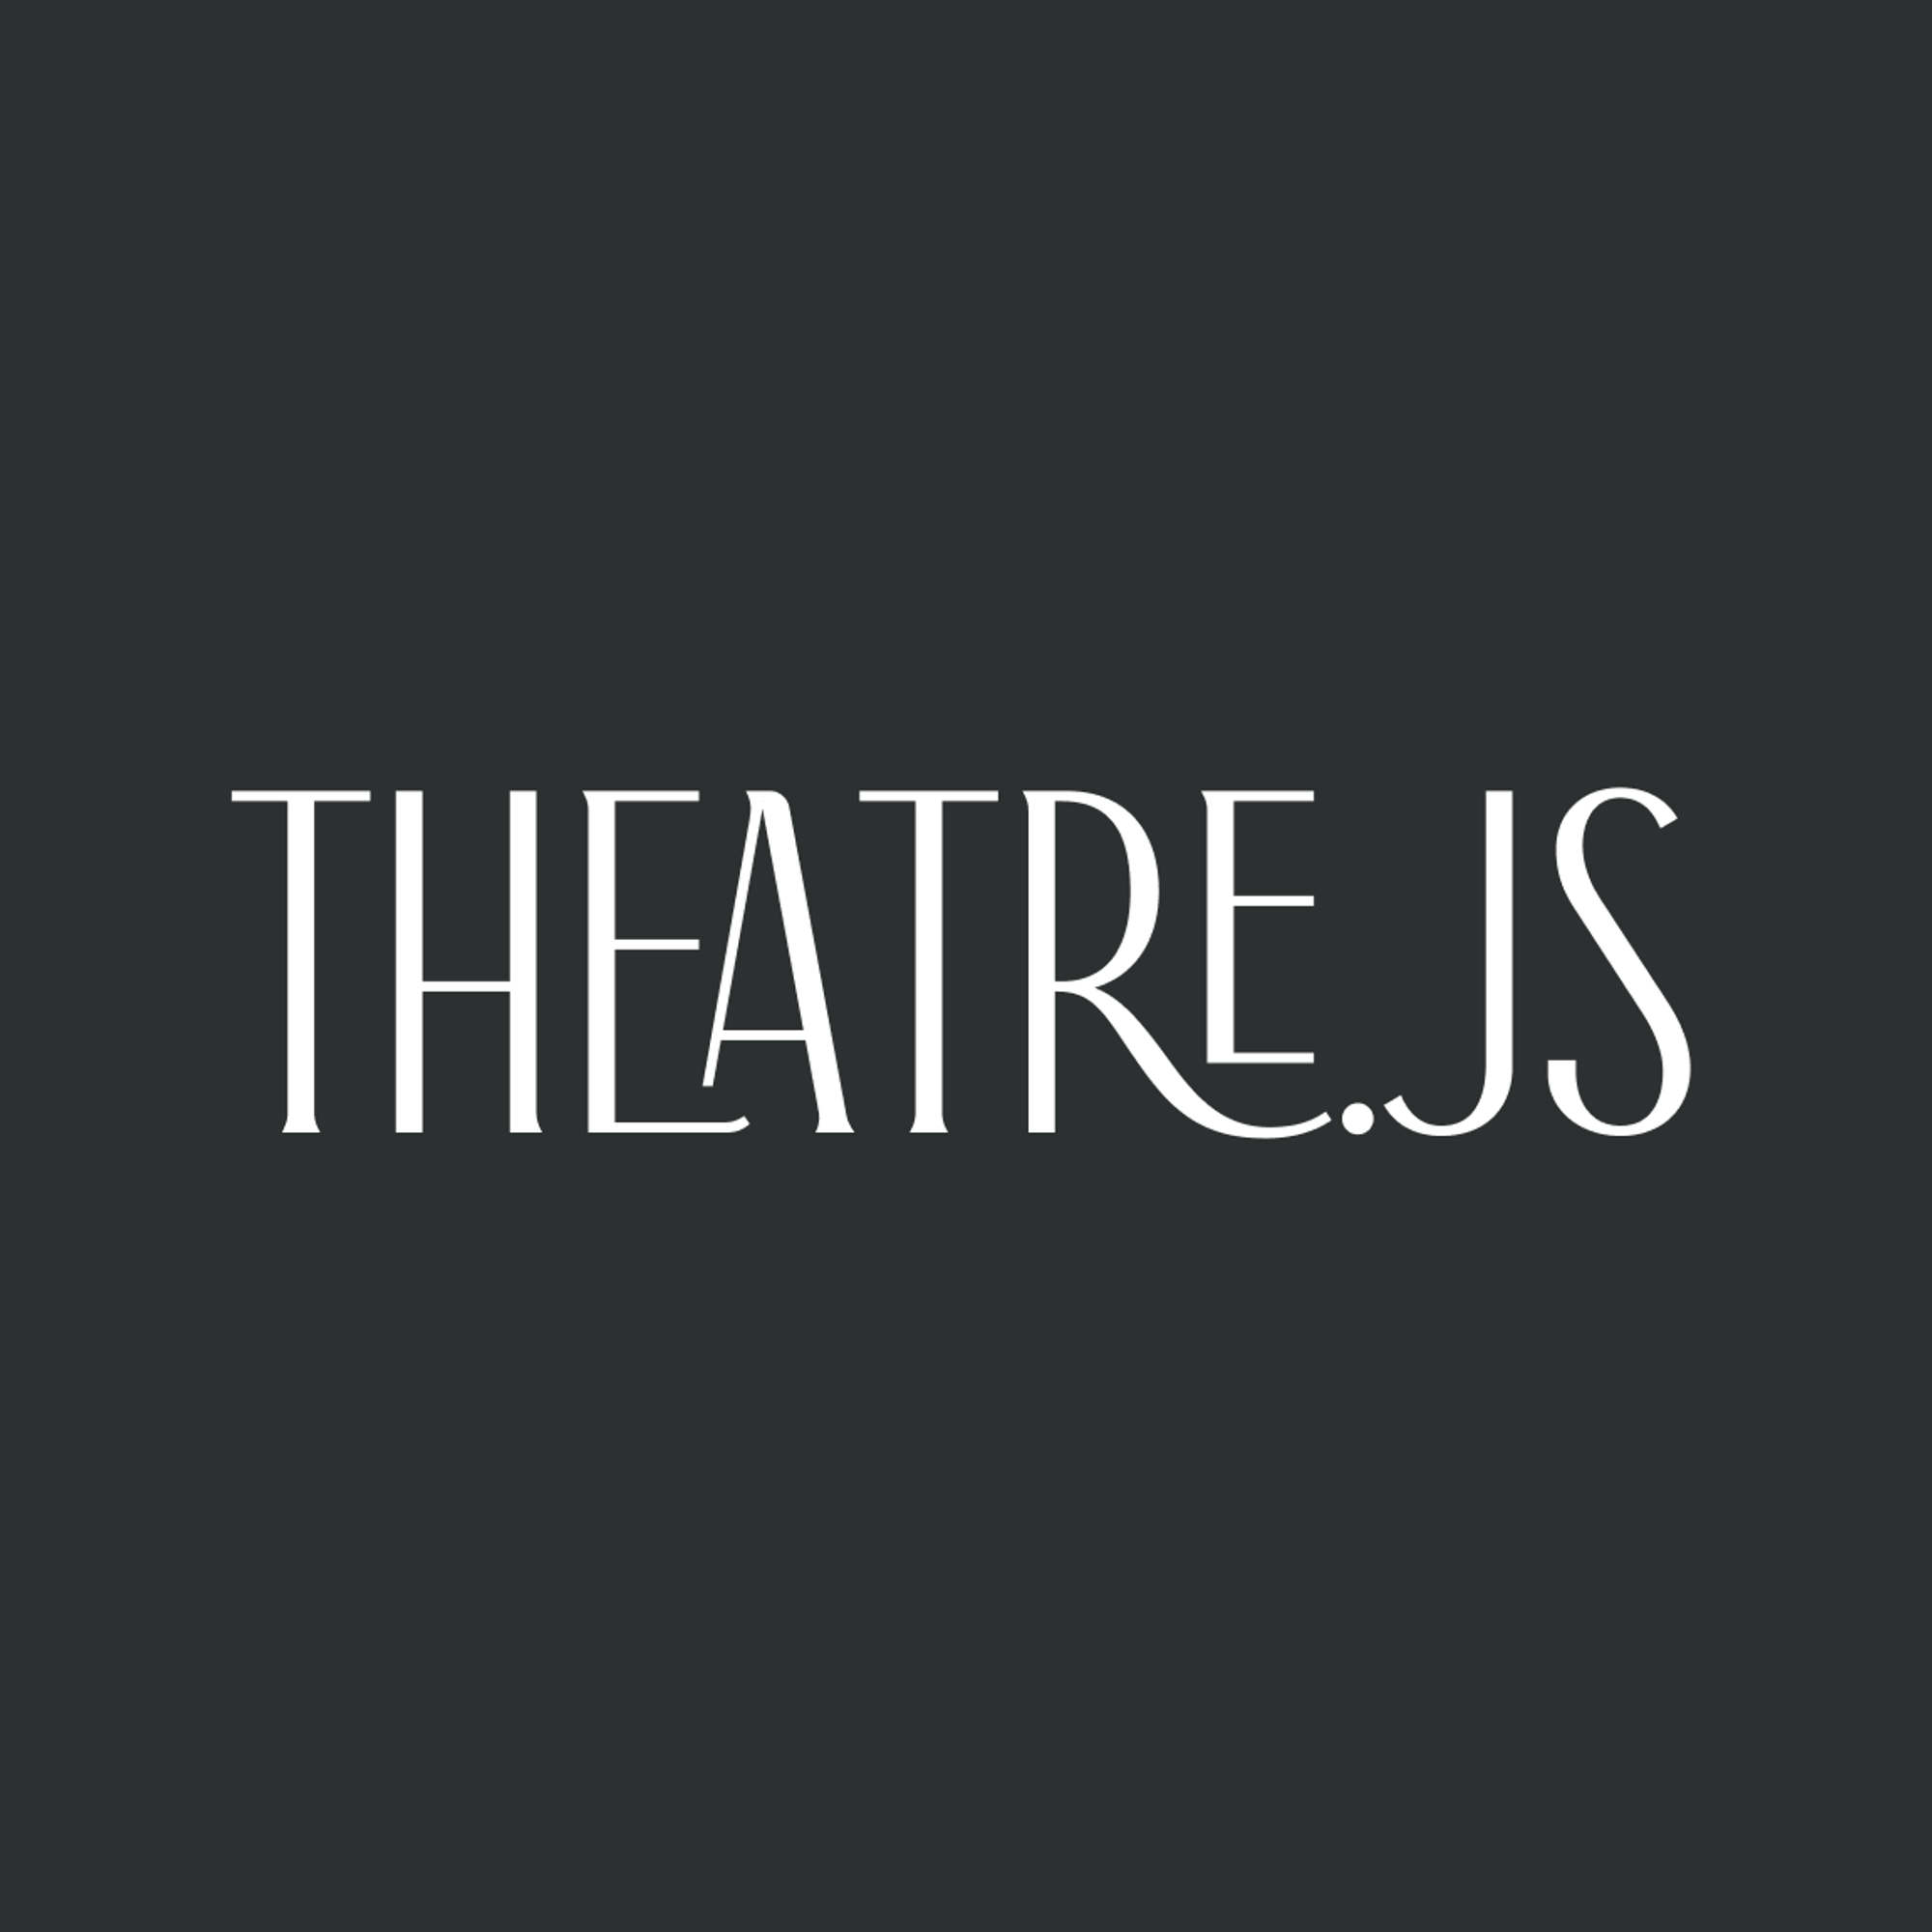 Theatre.js - animation toolbox for the web